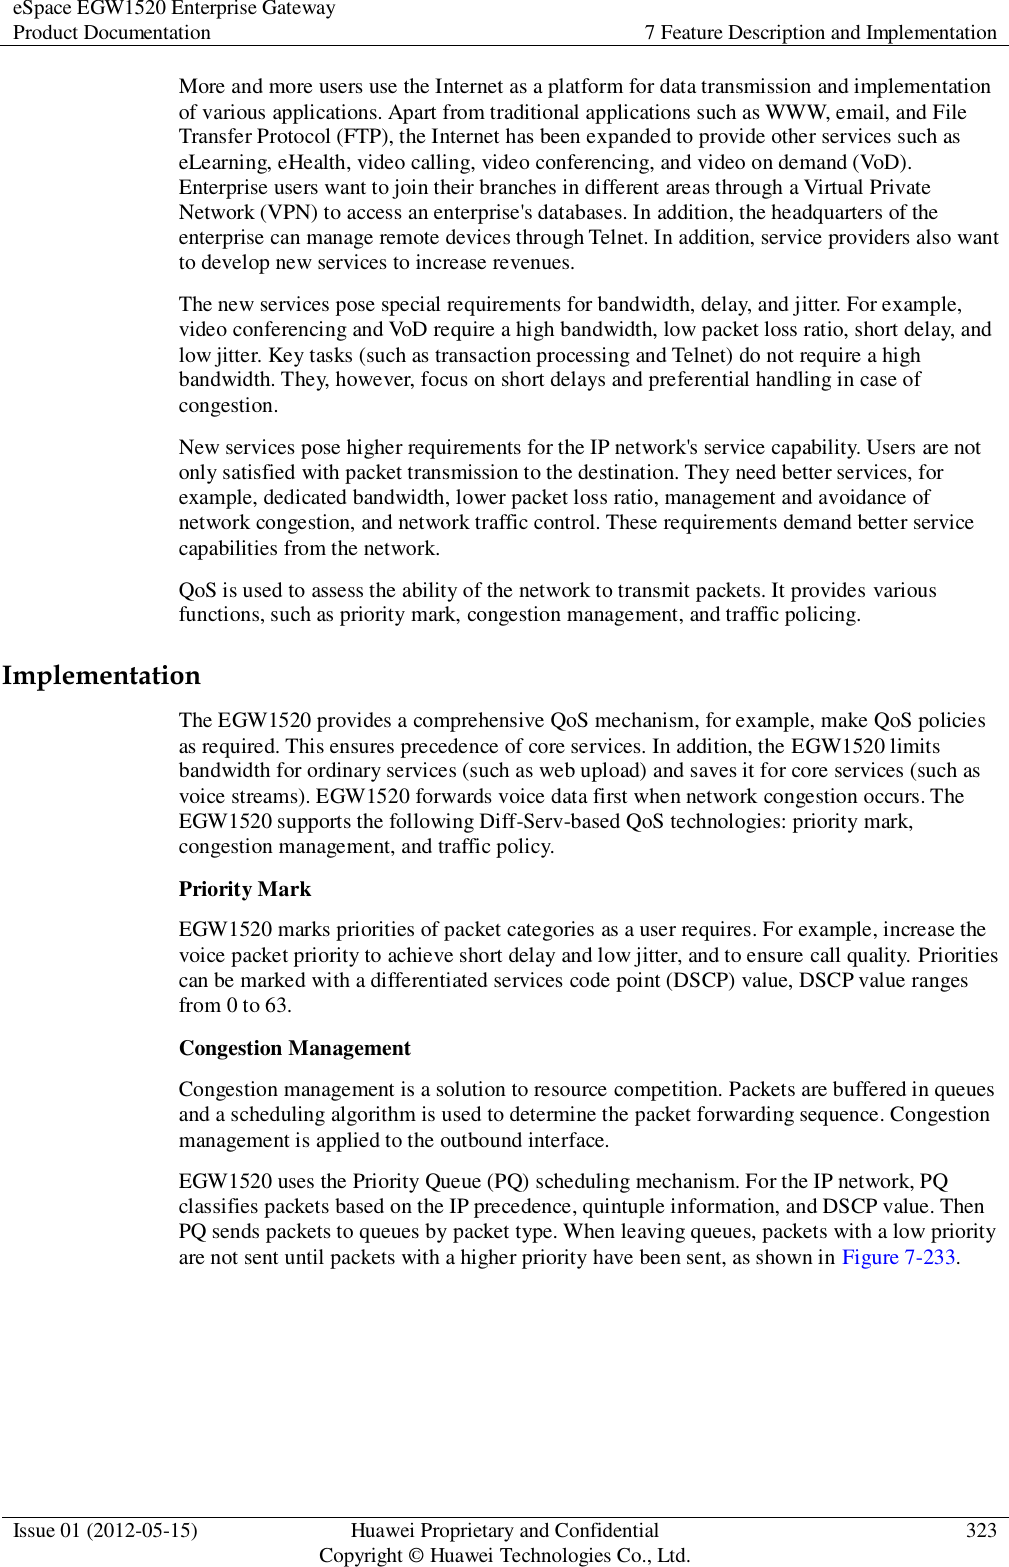 eSpace EGW1520 Enterprise Gateway Product Documentation 7 Feature Description and Implementation  Issue 01 (2012-05-15) Huawei Proprietary and Confidential                                     Copyright © Huawei Technologies Co., Ltd. 323  More and more users use the Internet as a platform for data transmission and implementation of various applications. Apart from traditional applications such as WWW, email, and File Transfer Protocol (FTP), the Internet has been expanded to provide other services such as eLearning, eHealth, video calling, video conferencing, and video on demand (VoD). Enterprise users want to join their branches in different areas through a Virtual Private Network (VPN) to access an enterprise&apos;s databases. In addition, the headquarters of the enterprise can manage remote devices through Telnet. In addition, service providers also want to develop new services to increase revenues. The new services pose special requirements for bandwidth, delay, and jitter. For example, video conferencing and VoD require a high bandwidth, low packet loss ratio, short delay, and low jitter. Key tasks (such as transaction processing and Telnet) do not require a high bandwidth. They, however, focus on short delays and preferential handling in case of congestion. New services pose higher requirements for the IP network&apos;s service capability. Users are not only satisfied with packet transmission to the destination. They need better services, for example, dedicated bandwidth, lower packet loss ratio, management and avoidance of network congestion, and network traffic control. These requirements demand better service capabilities from the network. QoS is used to assess the ability of the network to transmit packets. It provides various functions, such as priority mark, congestion management, and traffic policing. Implementation The EGW1520 provides a comprehensive QoS mechanism, for example, make QoS policies as required. This ensures precedence of core services. In addition, the EGW1520 limits bandwidth for ordinary services (such as web upload) and saves it for core services (such as voice streams). EGW1520 forwards voice data first when network congestion occurs. The EGW1520 supports the following Diff-Serv-based QoS technologies: priority mark, congestion management, and traffic policy. Priority Mark EGW1520 marks priorities of packet categories as a user requires. For example, increase the voice packet priority to achieve short delay and low jitter, and to ensure call quality. Priorities can be marked with a differentiated services code point (DSCP) value, DSCP value ranges from 0 to 63.   Congestion Management Congestion management is a solution to resource competition. Packets are buffered in queues and a scheduling algorithm is used to determine the packet forwarding sequence. Congestion management is applied to the outbound interface.   EGW1520 uses the Priority Queue (PQ) scheduling mechanism. For the IP network, PQ classifies packets based on the IP precedence, quintuple information, and DSCP value. Then PQ sends packets to queues by packet type. When leaving queues, packets with a low priority are not sent until packets with a higher priority have been sent, as shown in Figure 7-233. 